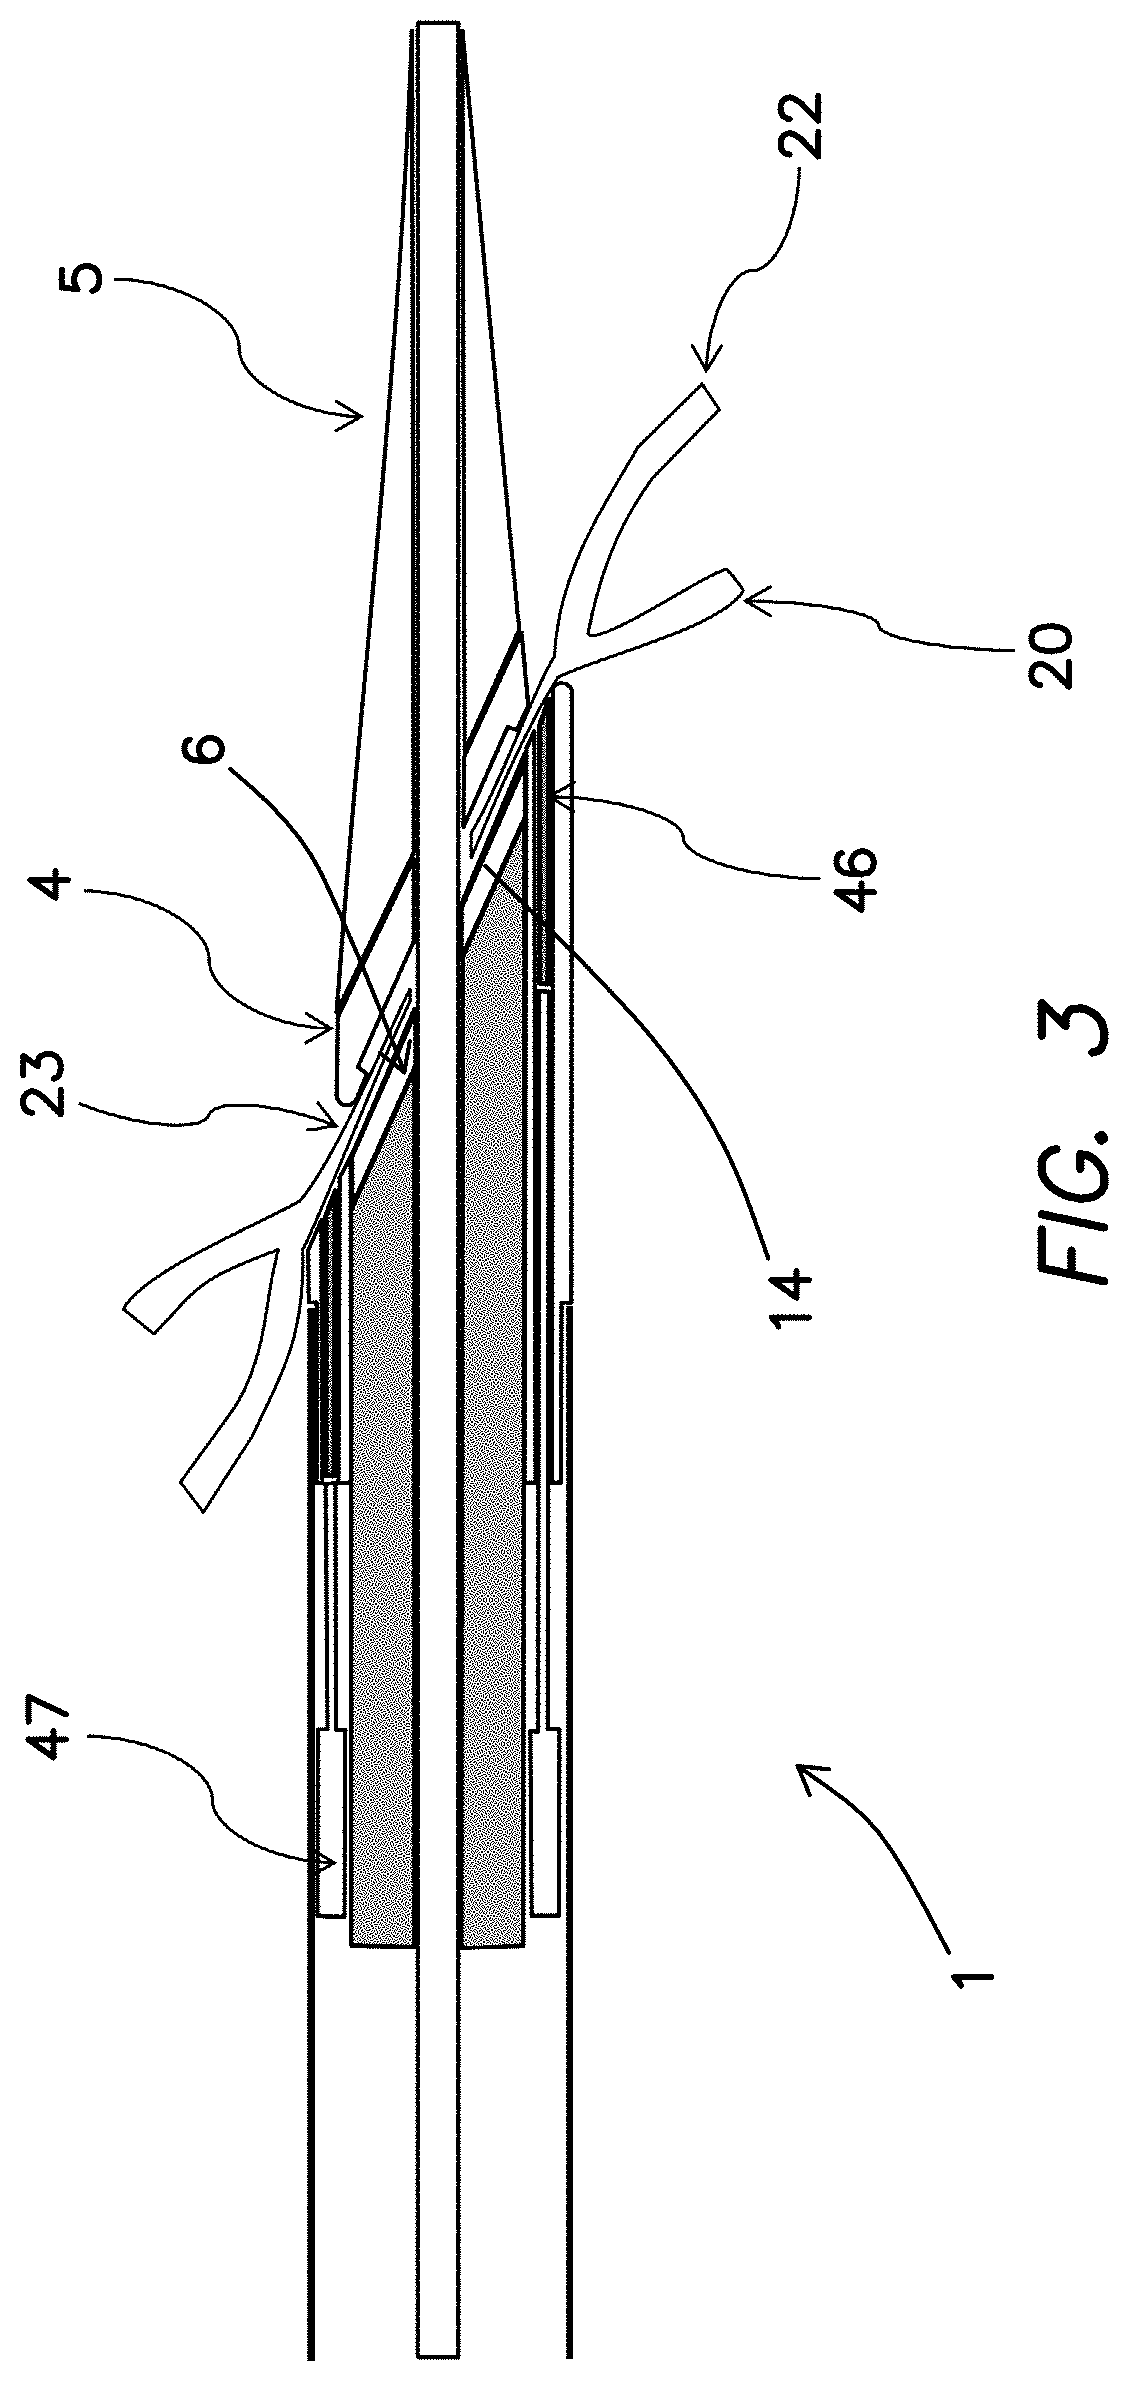 Percutaneous arterial to venous anastomosis clip application catheter system and methods